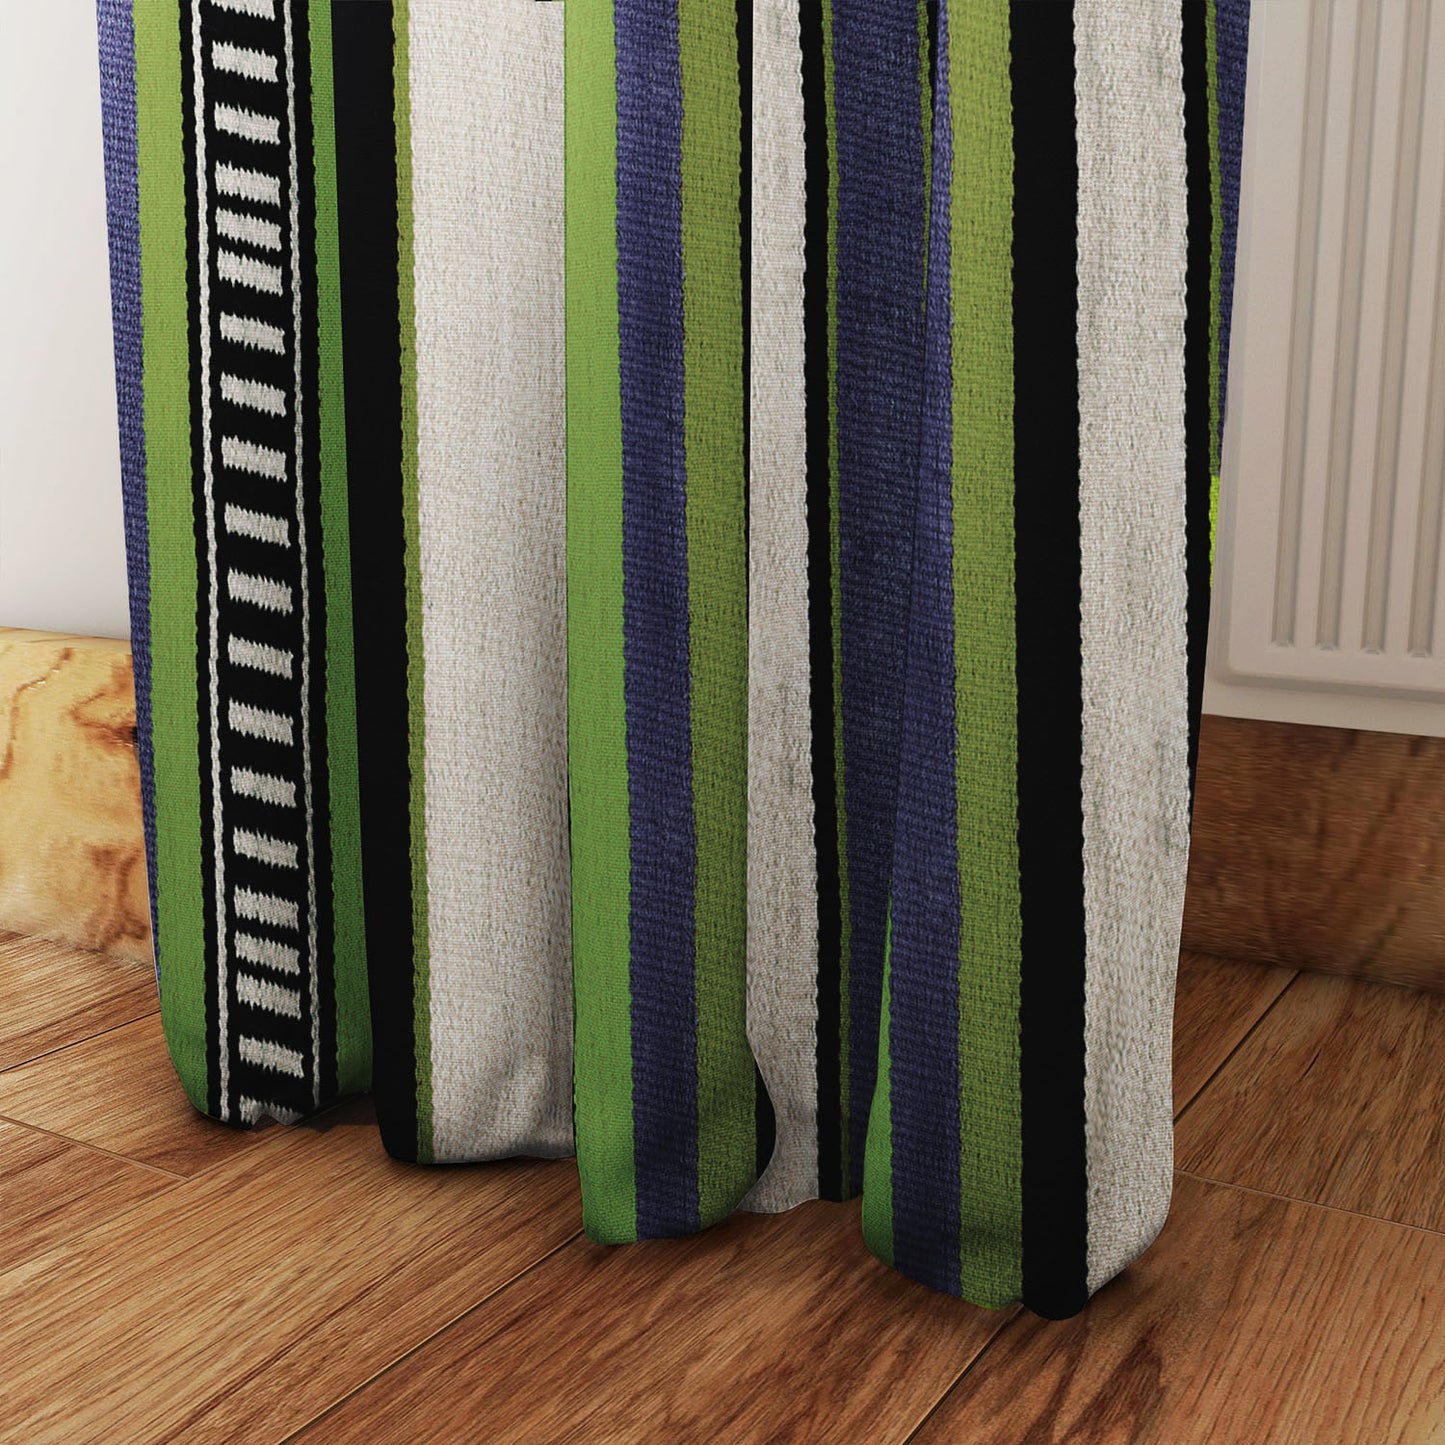 Modern Bohemian Curtains with Blackout in Colorful Ethnic Stripes - Green